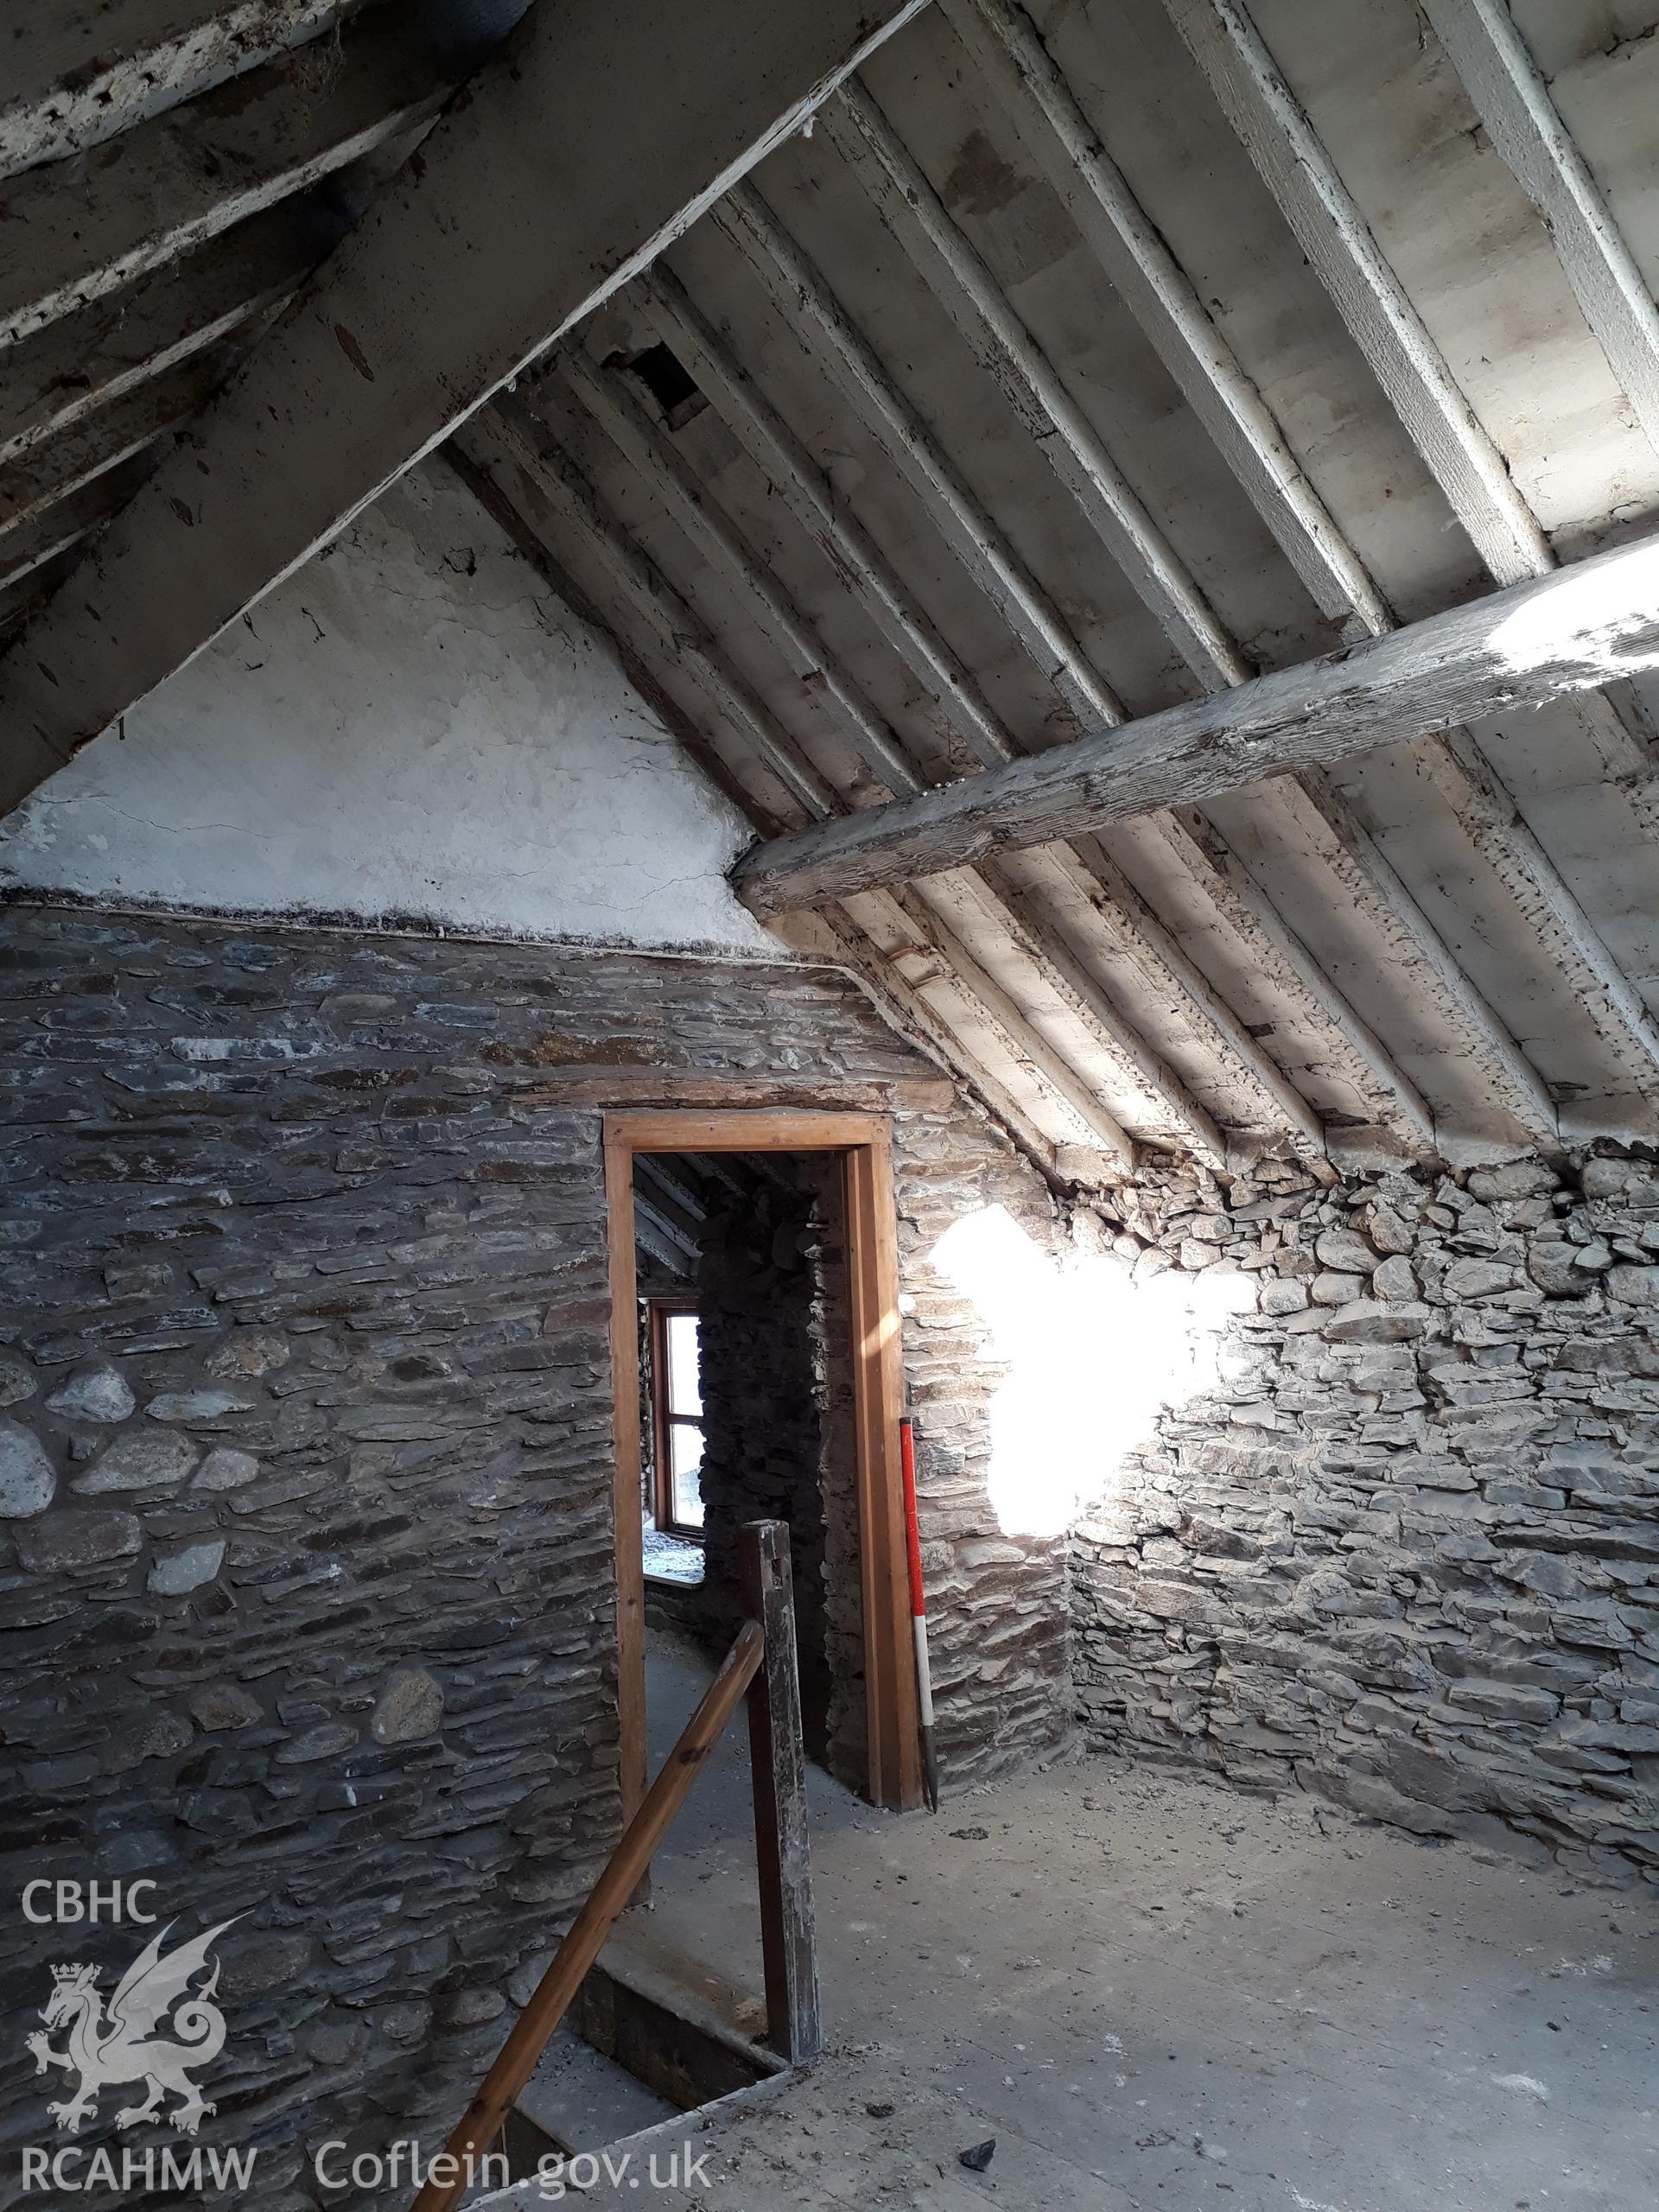 Bedroom 1, doorway to Bedroom 2. View north. 1m scale. Photographed as part of archaeological building recording conducted at Bryn Ysguboriau, Llanelidan, Denbighshire, carried out by Archaeology Wales, 2018. Project no. P2587.